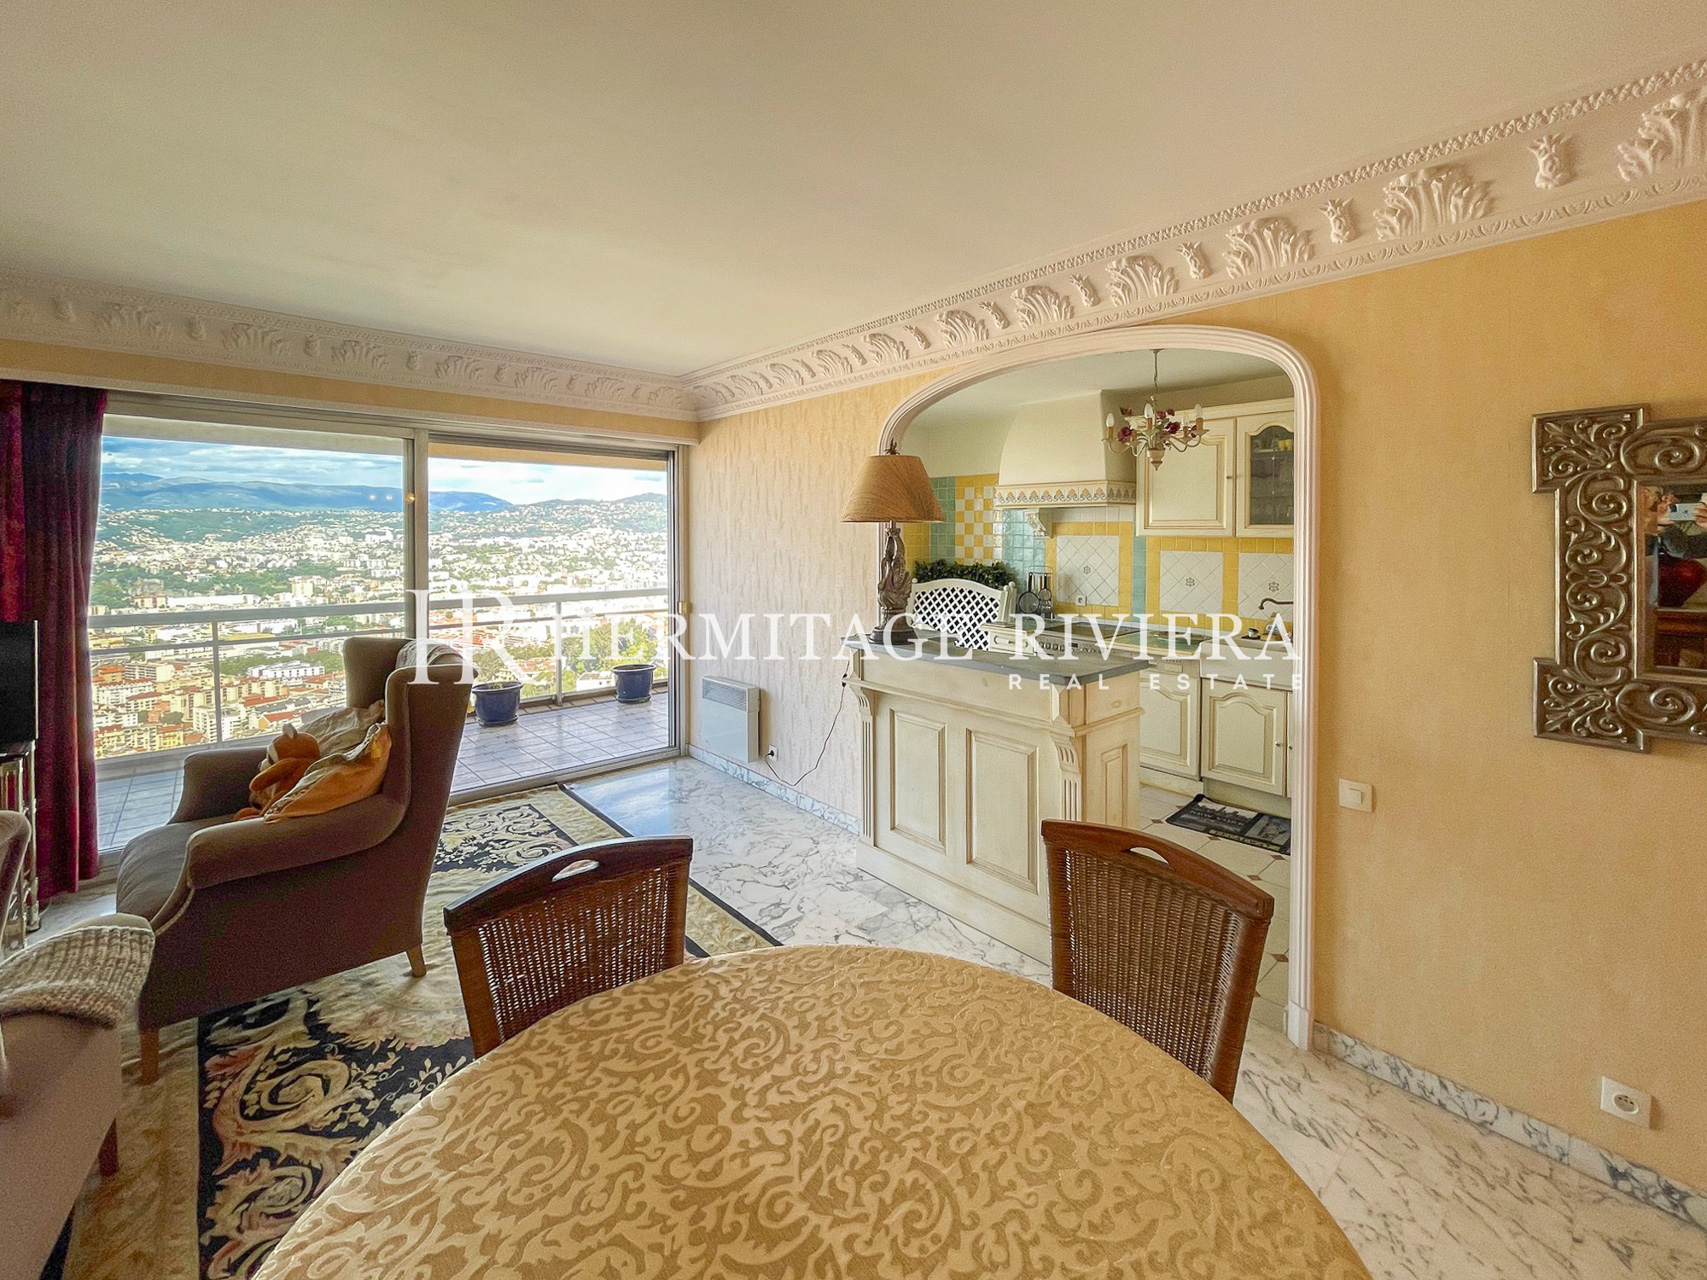 Top floor two bedroom apartment with views over Nice and the sea (image 9)